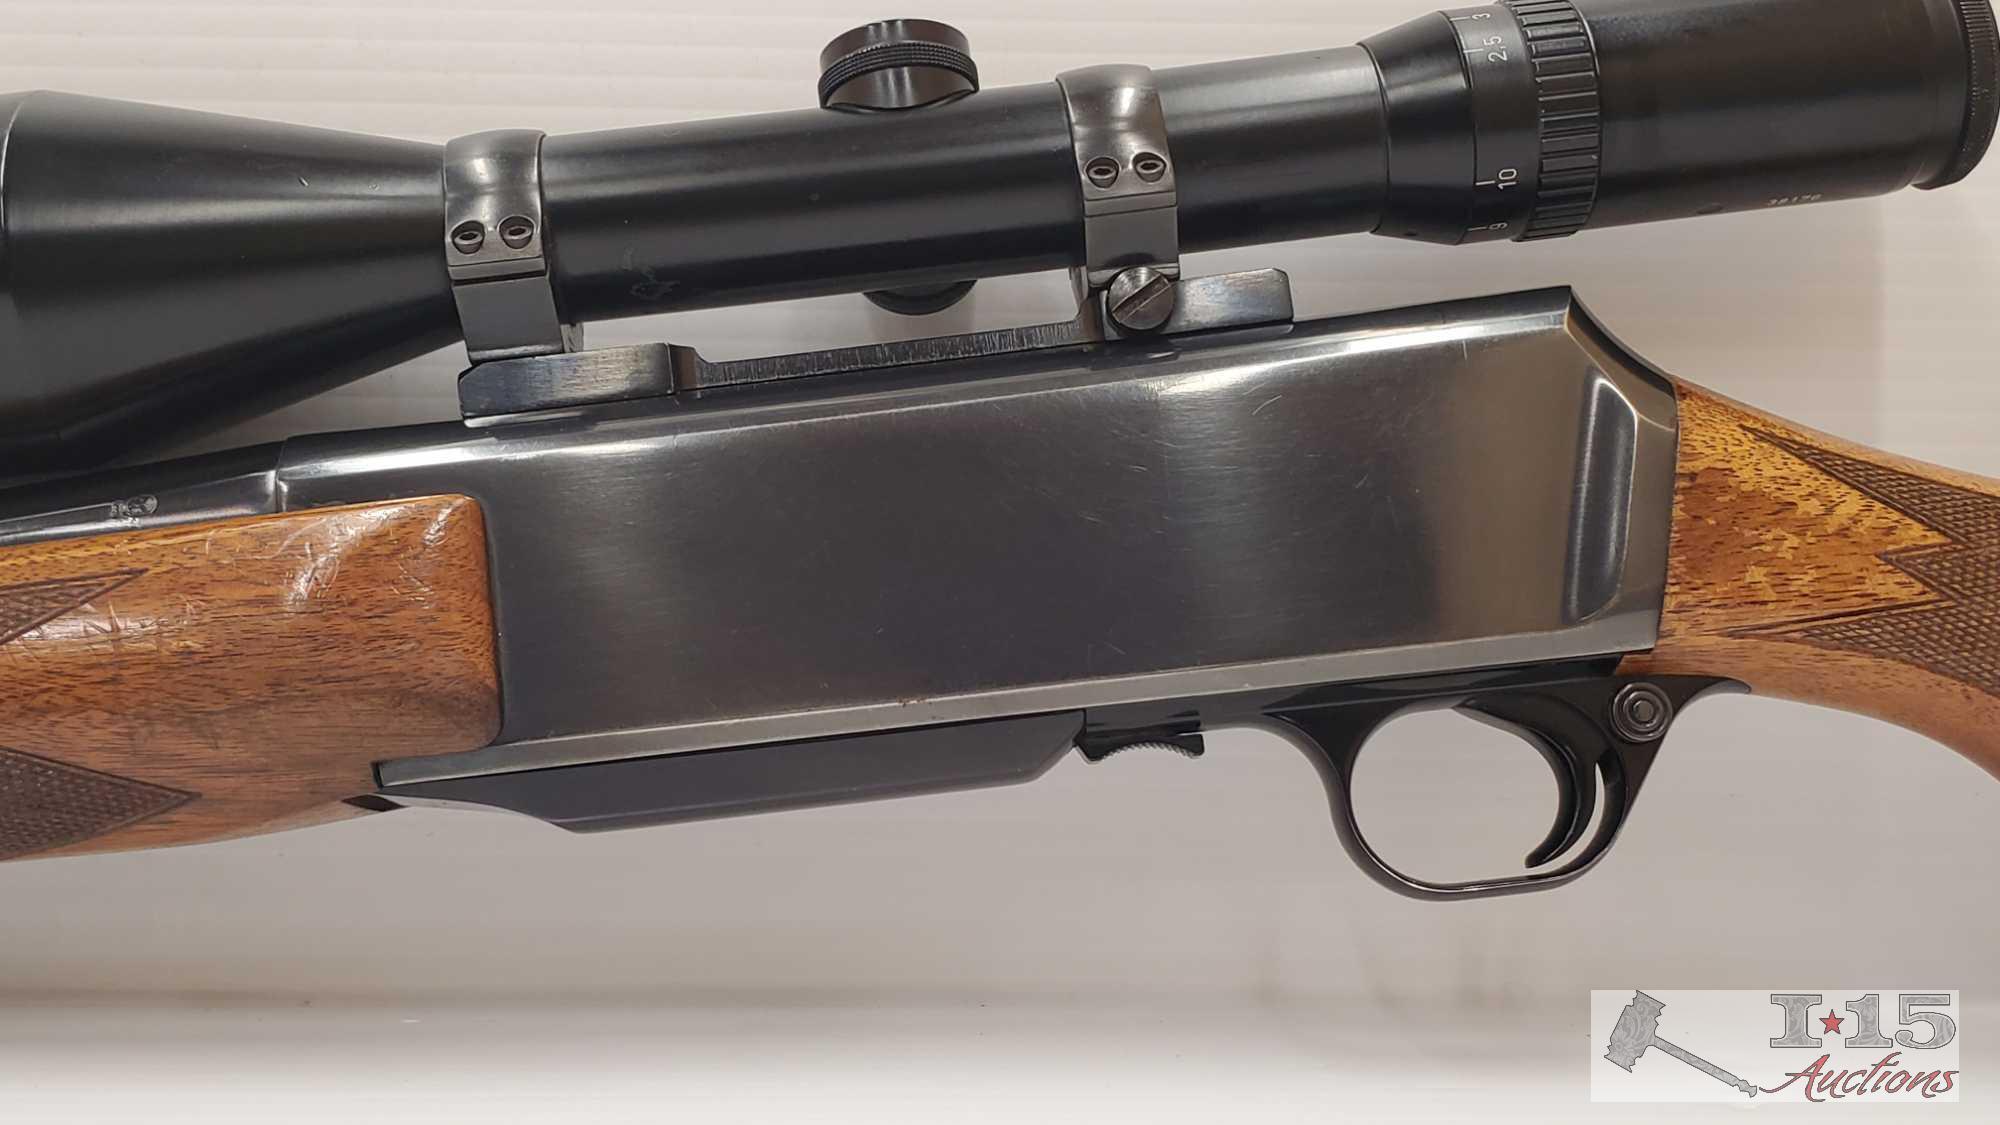 Browning BAR .308 Cal Rifle with Schmidt & Bender Scope